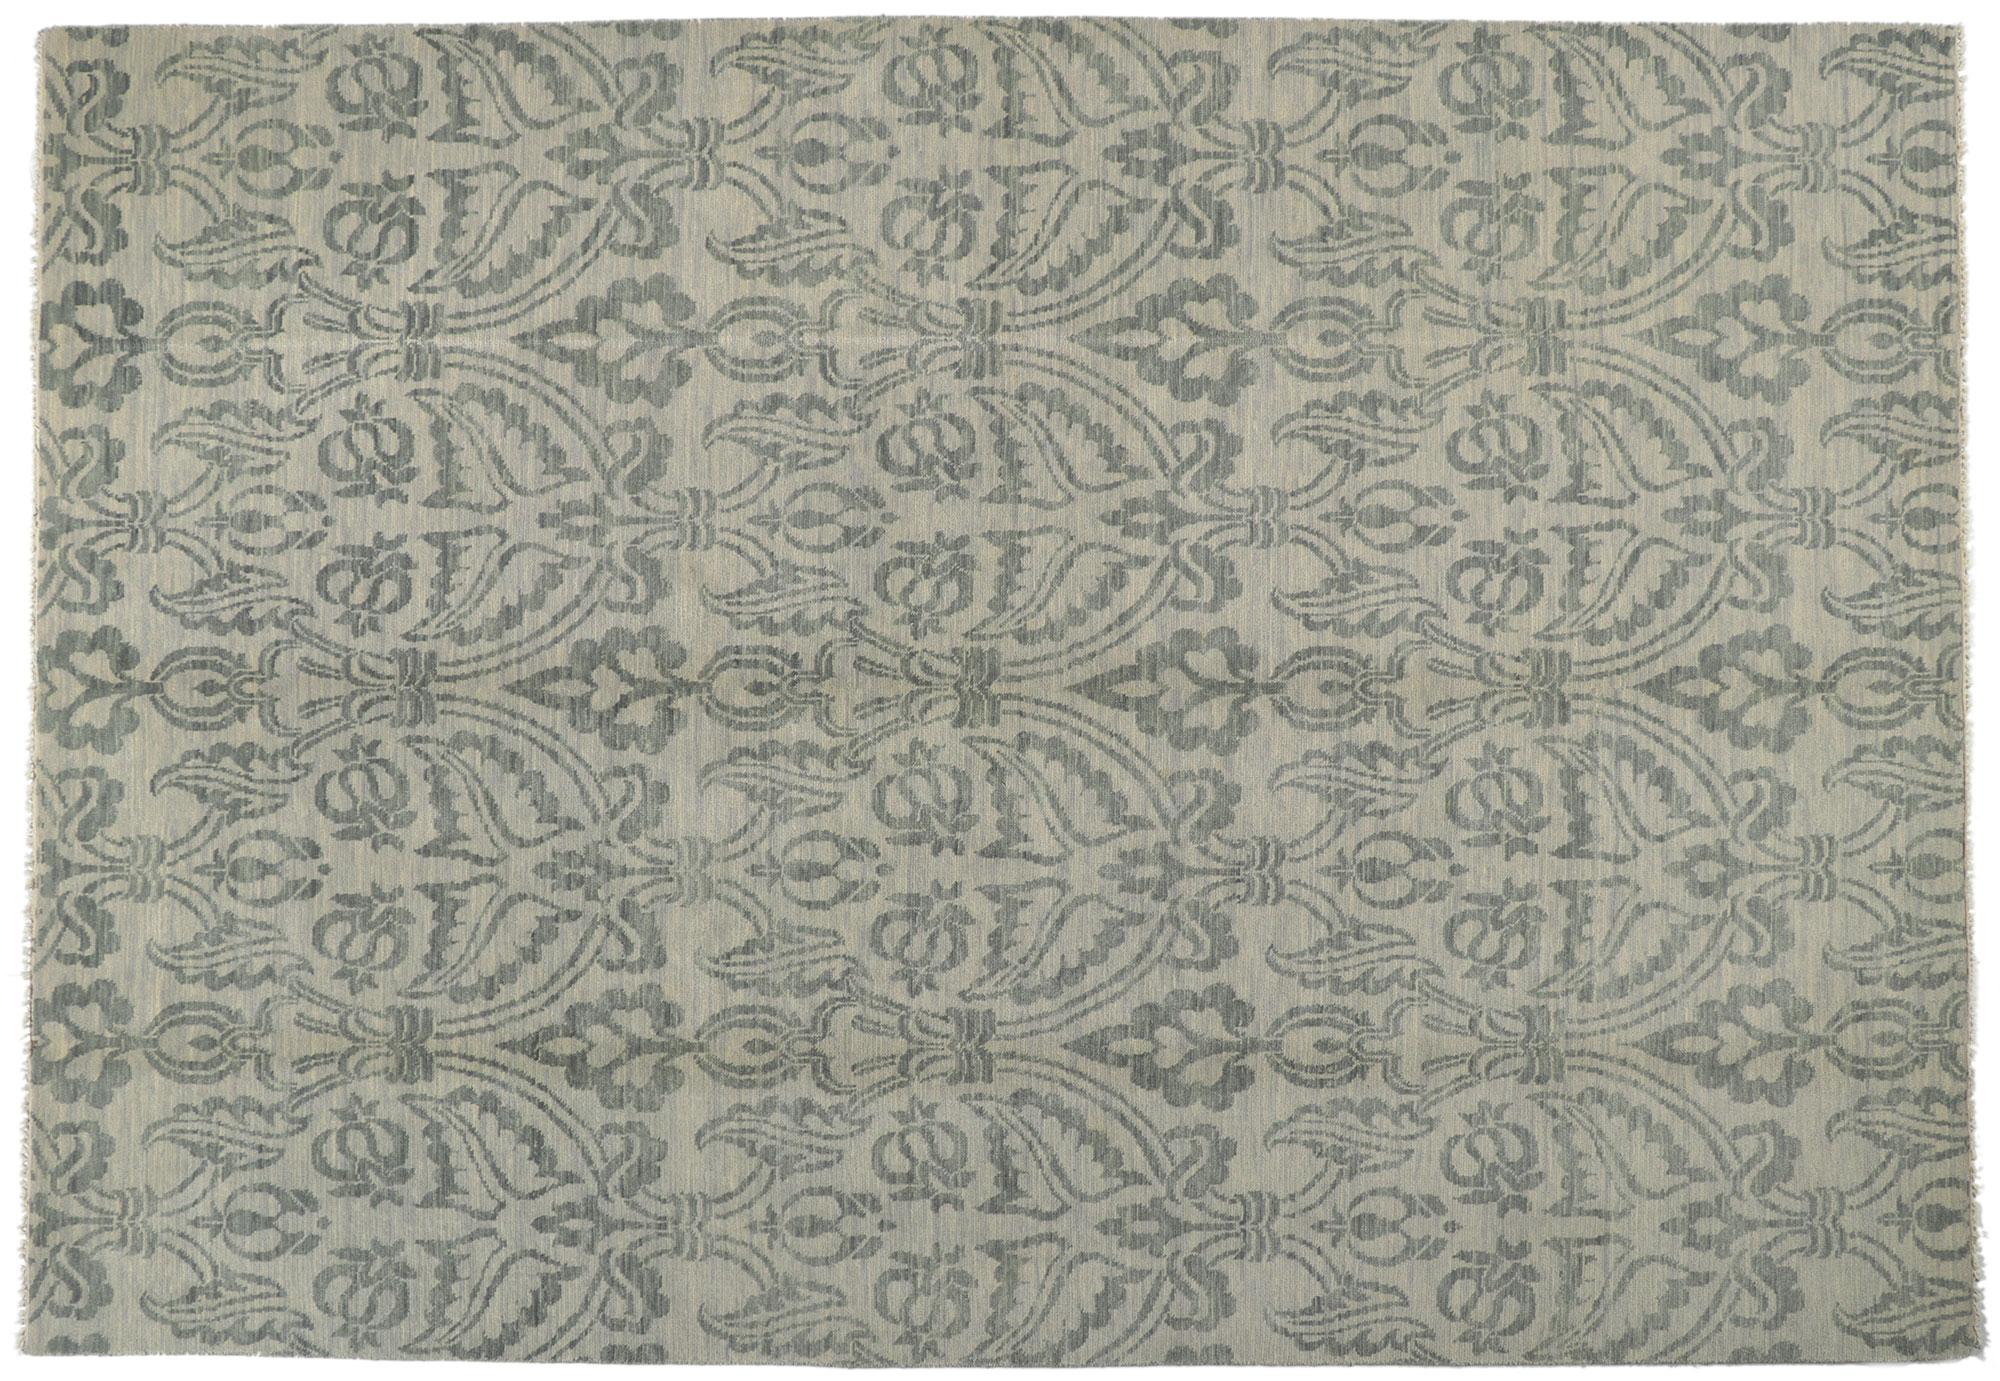 New Transitional Damask Ikat Rug with Blue and Gray Earth-Tone Colors For Sale 2